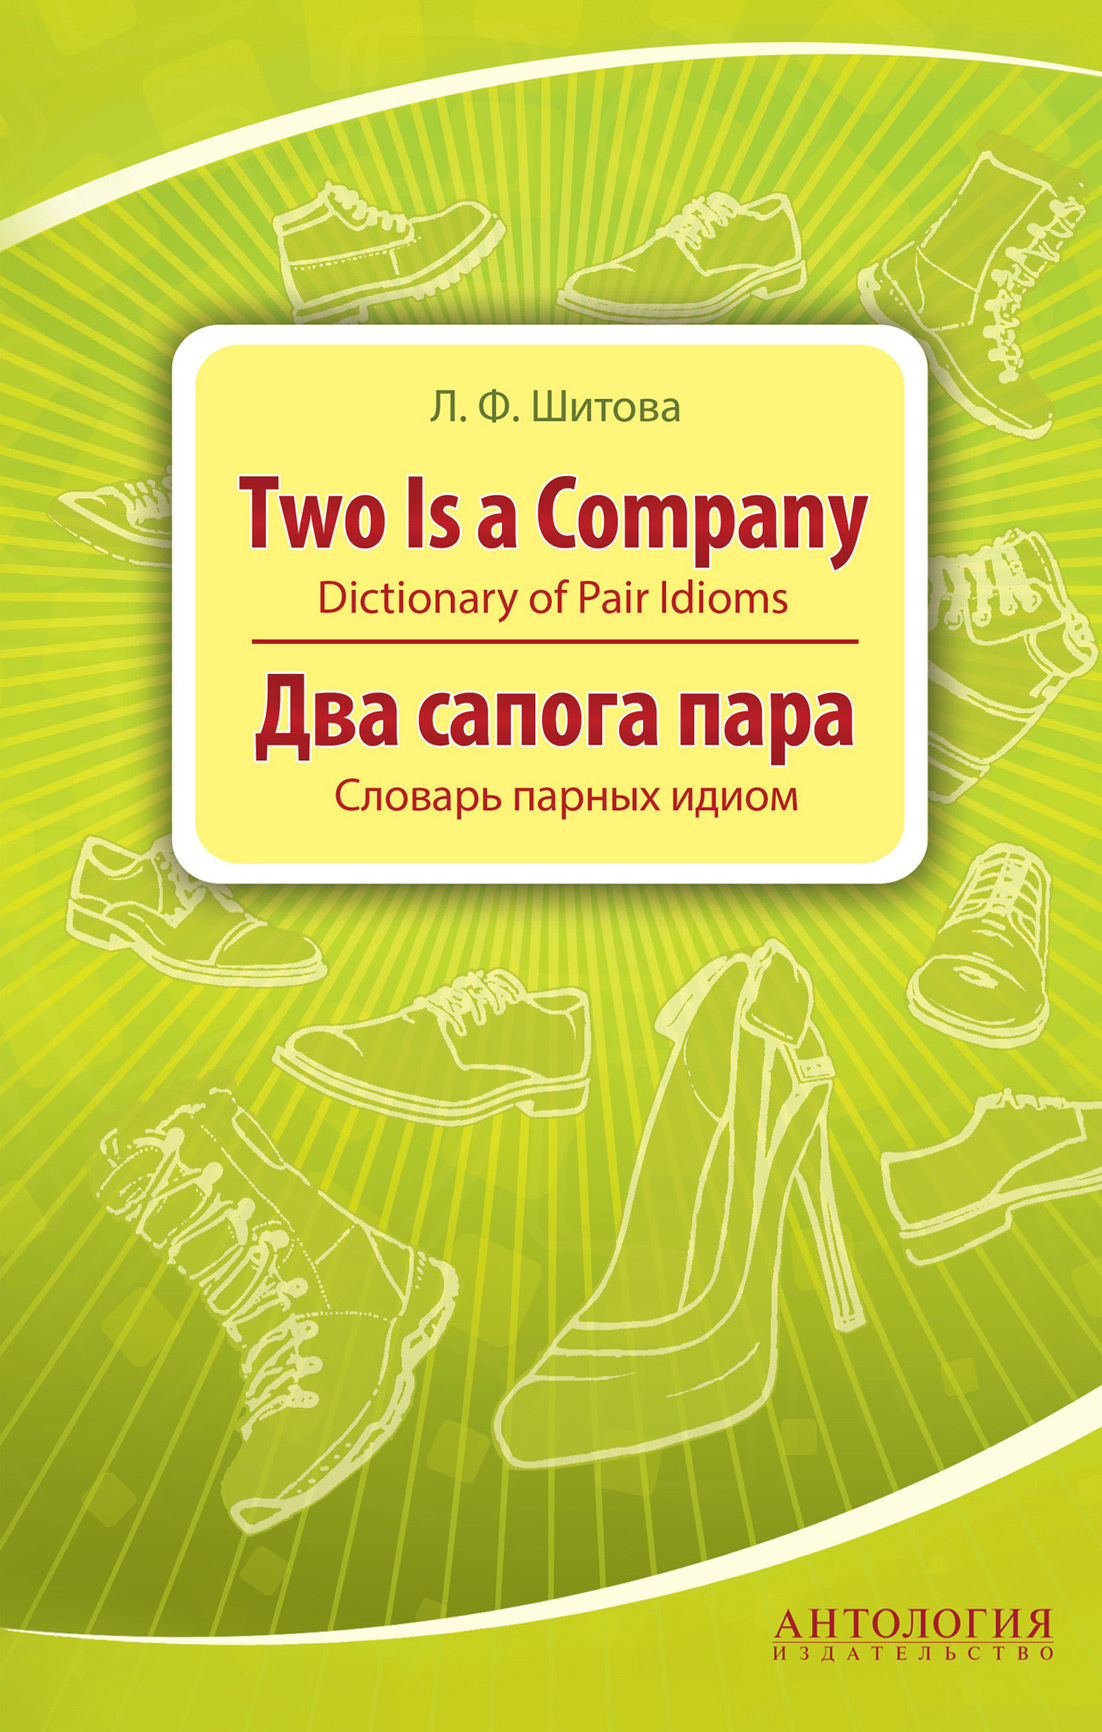 Two is a Company. Dictionary of Pair Idioms.Два сапога пара. Словарь парных идиом